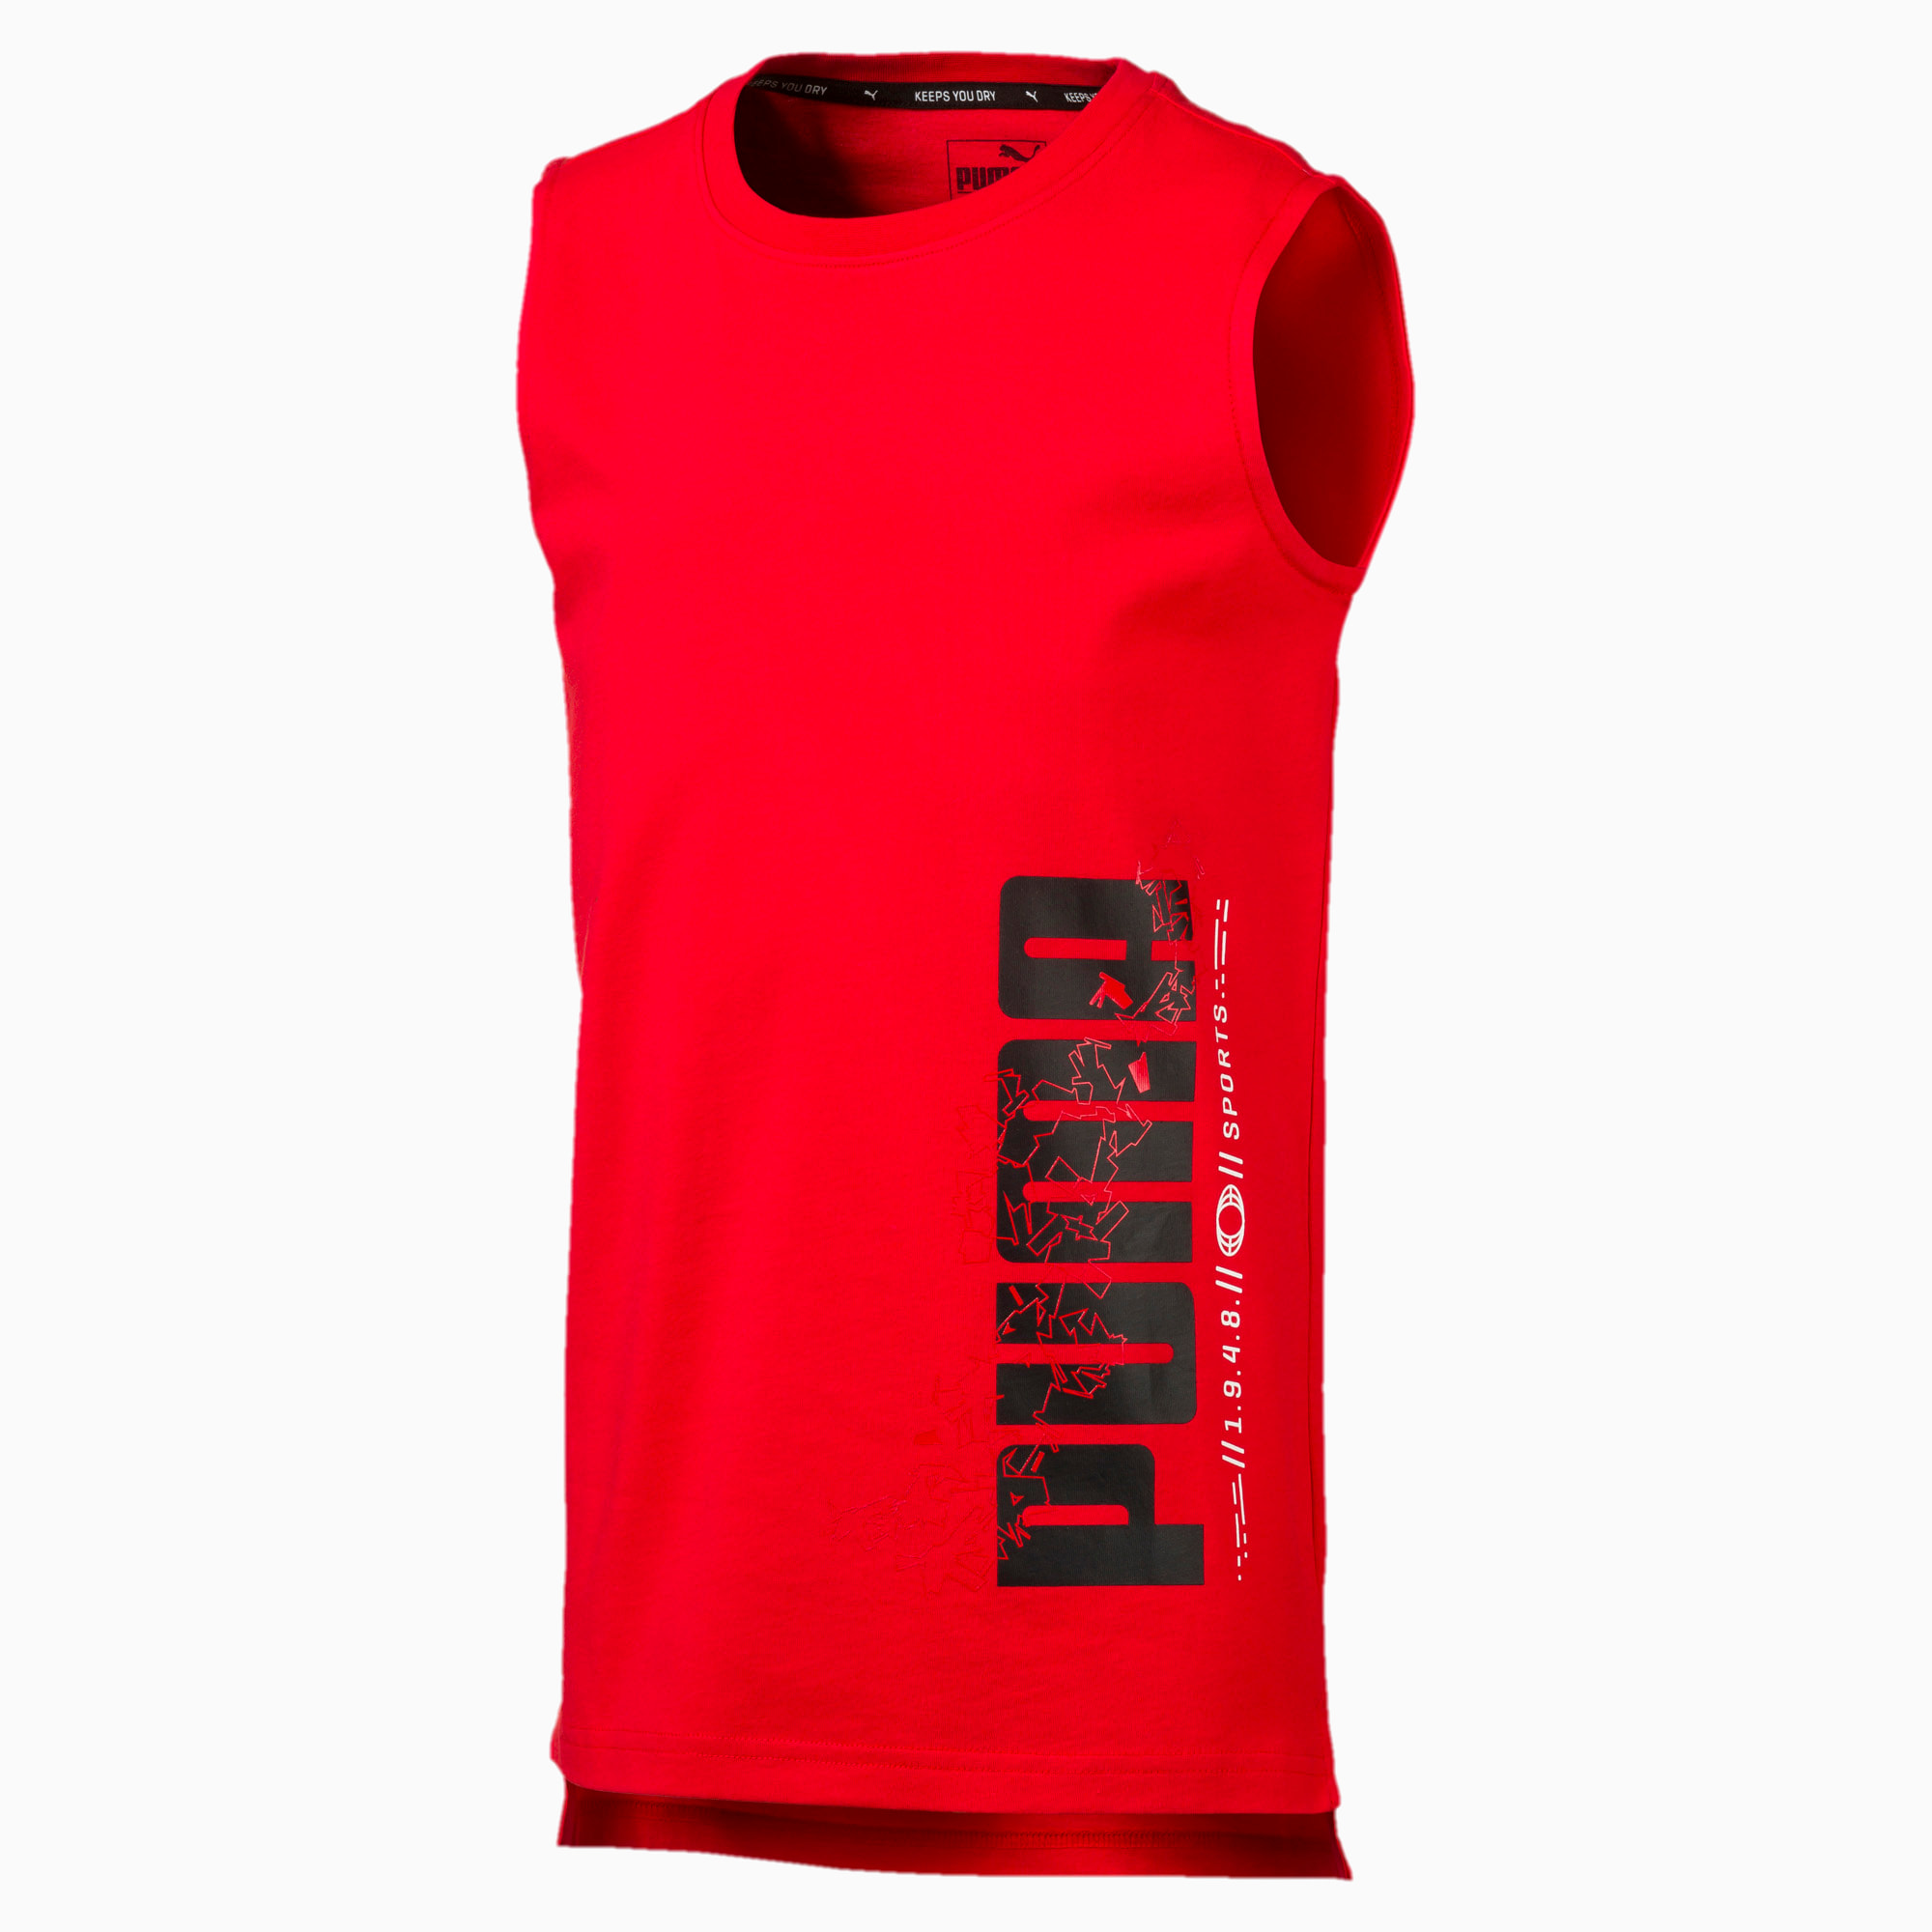 Active Sport Boys' Sleeveless Tee, High Risk Red, large-SEA